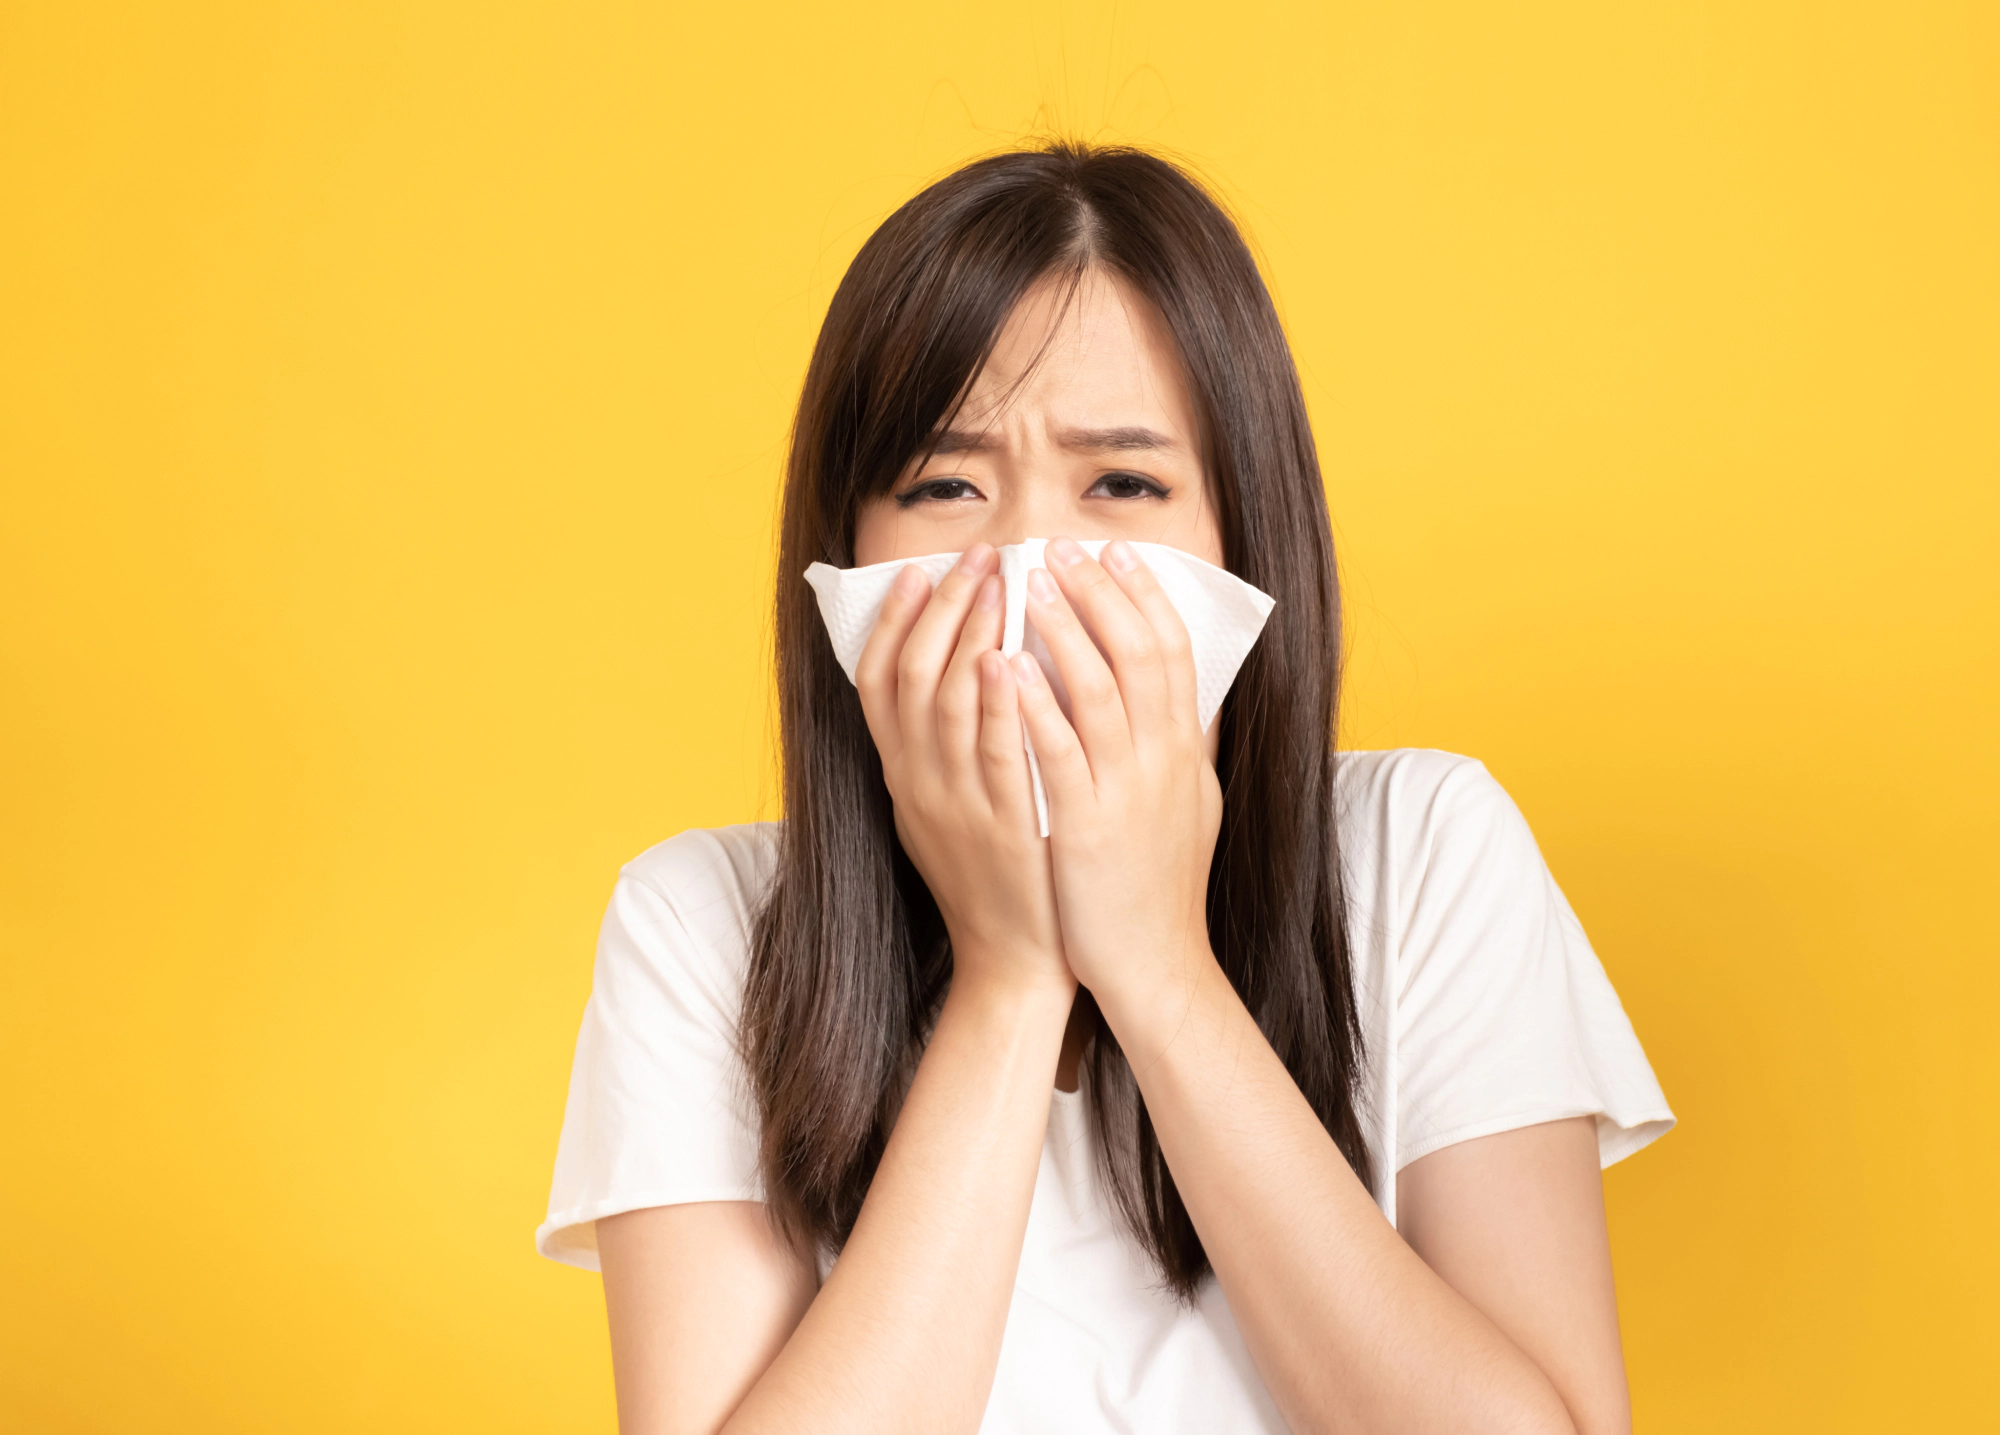 Woman blowing her nose against a yellow background.